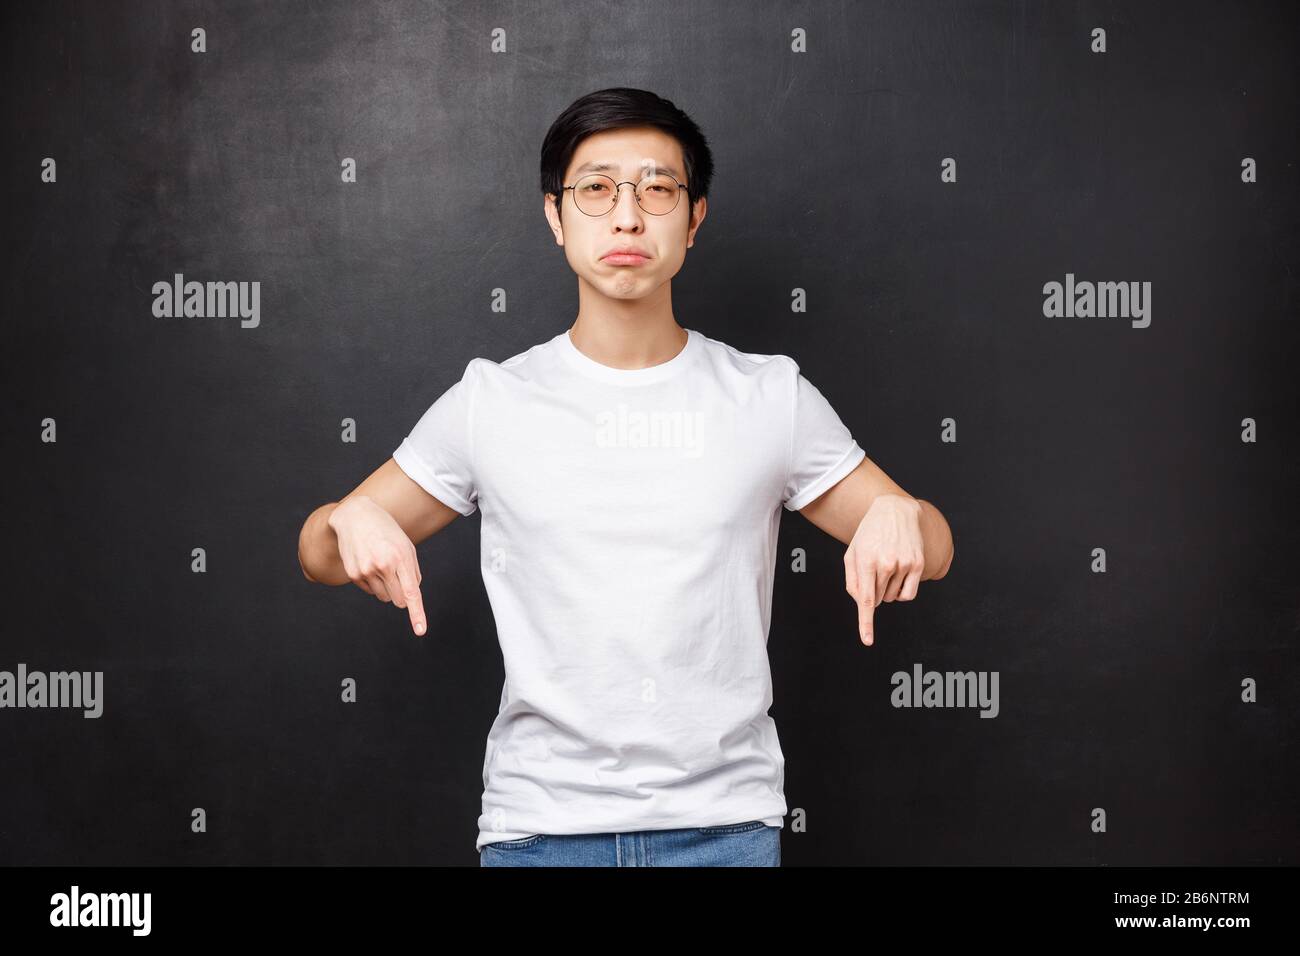 Miserable and gloomy upset cute asian guy sobbing look at camera with regret and sadness, pointing fingers down at something broken or upsetting, feel Stock Photo